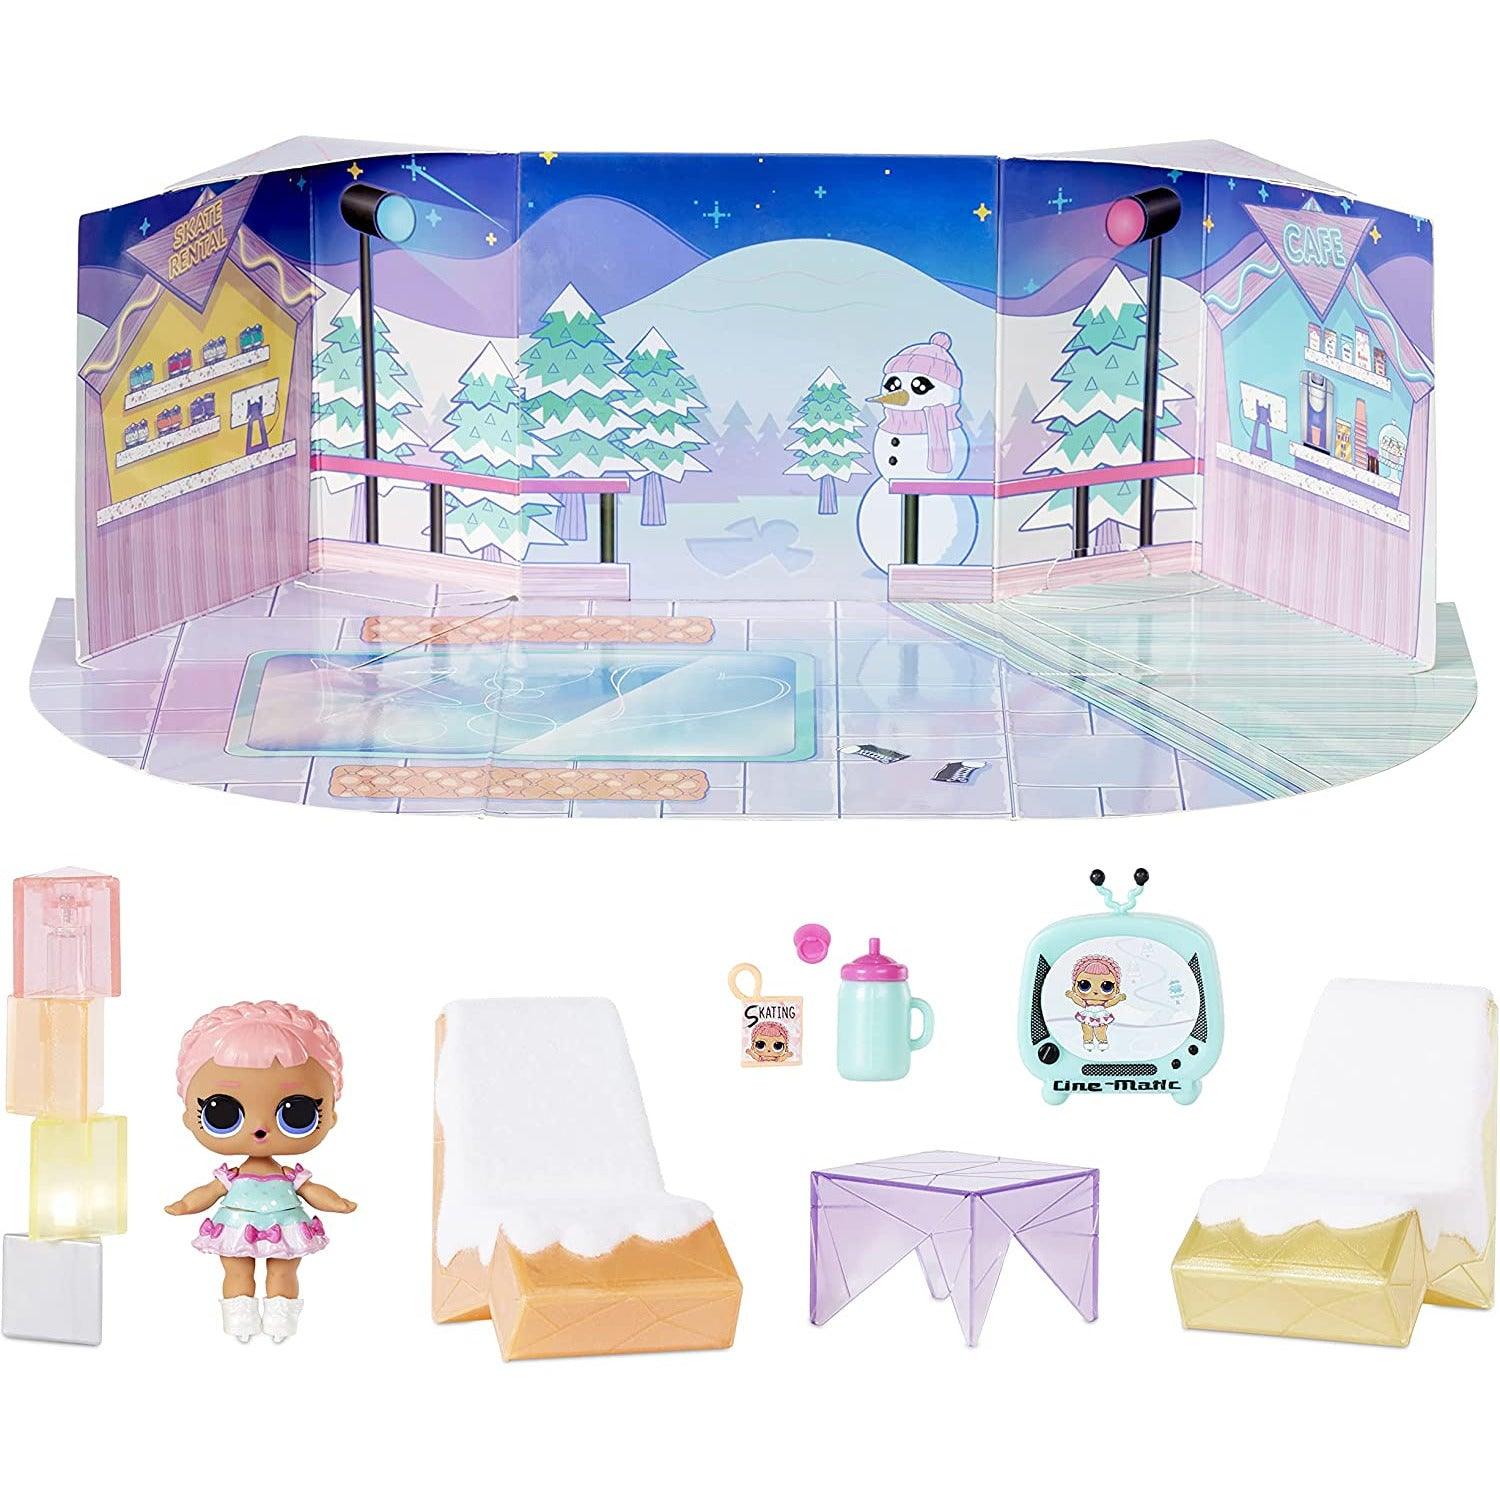 L.O.L. Surprise! Winter Chill Hangout Spaces Furniture Playset with Ice Sk8er Doll - BumbleToys - 5-7 Years, Dolls, Fashion Dolls & Accessories, Girls, L.O.L, OXE, Pre-Order